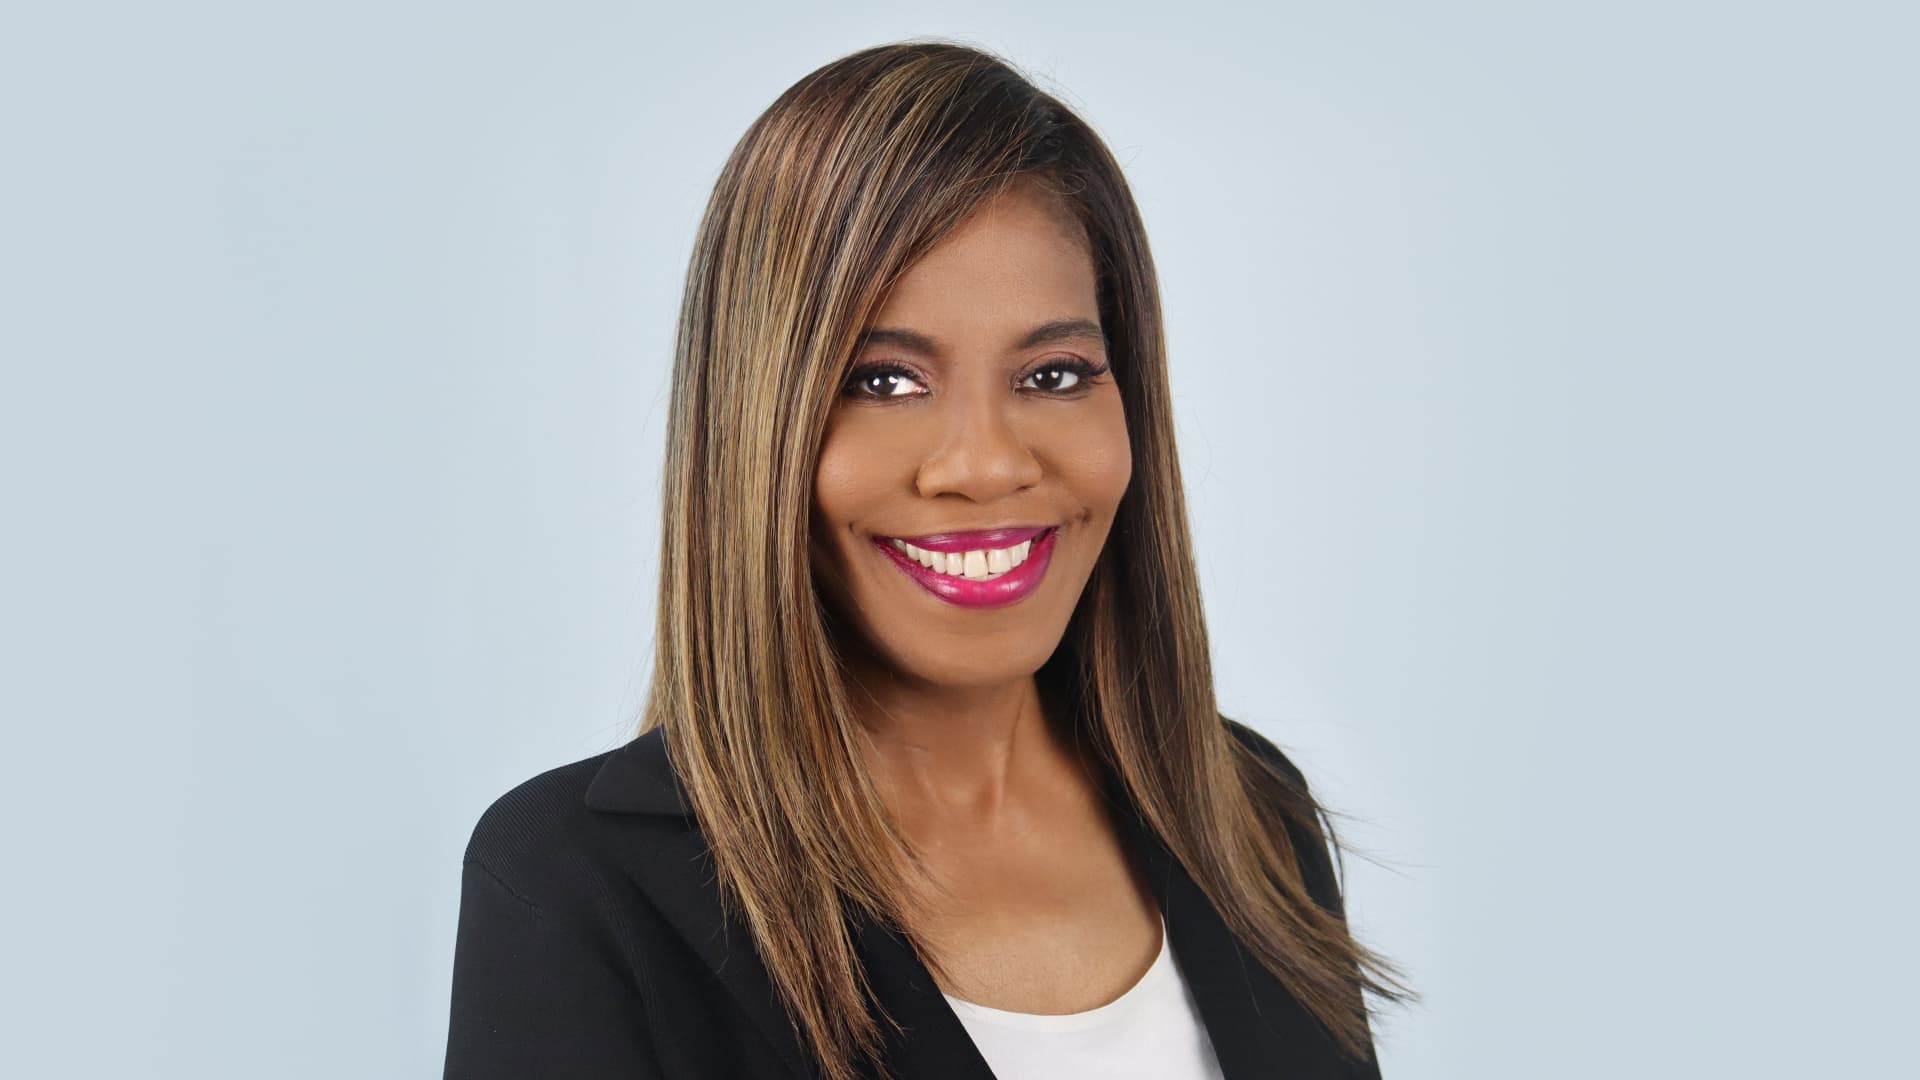 Dr. Patrice Harris was the president of the American Medical Association from 2020 to 2021.